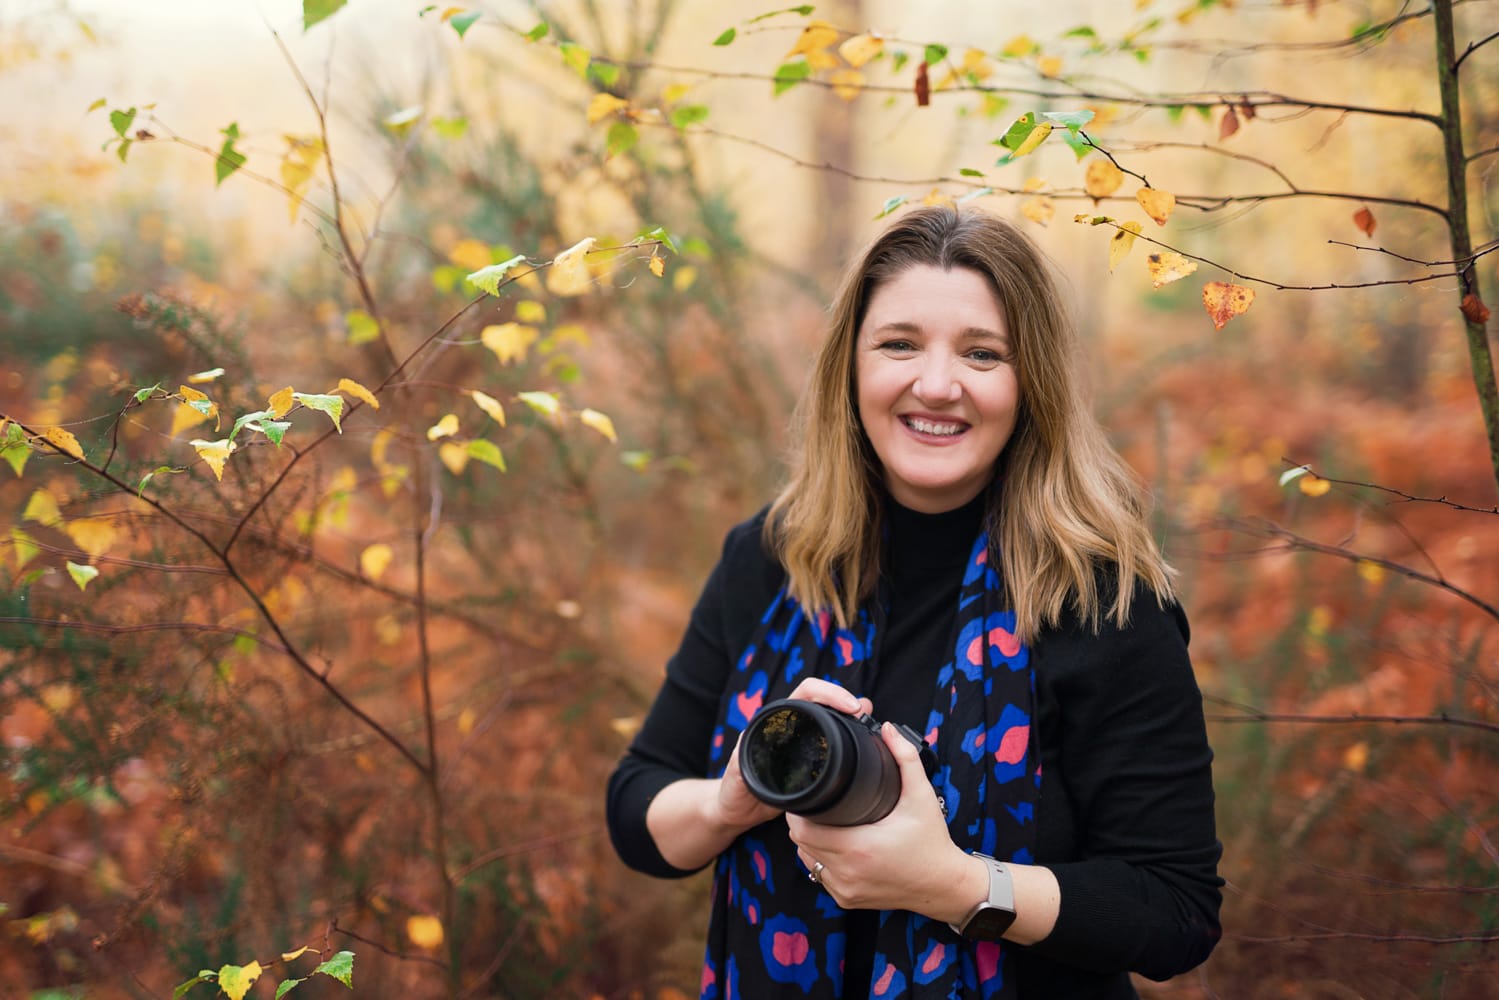 Great free SEO Tools for photographers with Nina Mace